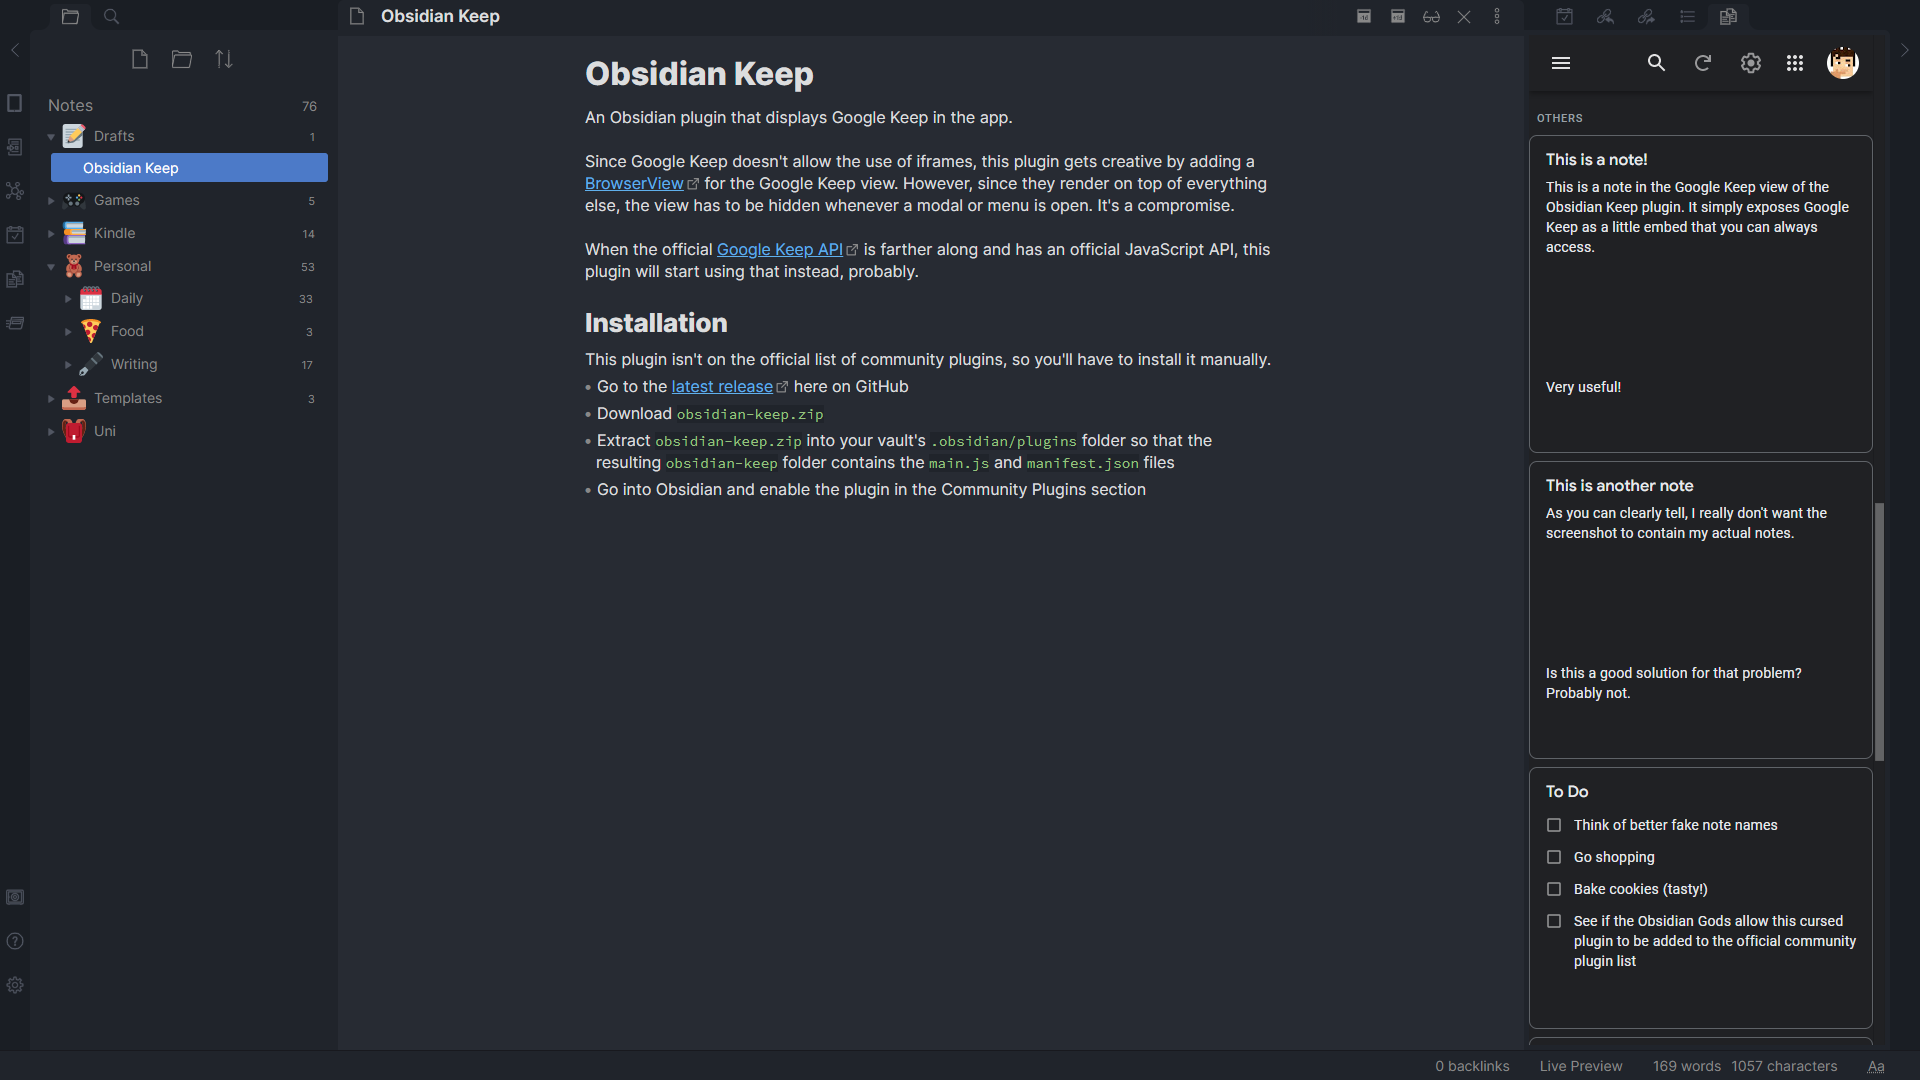 A screenshot of the Obsidian Keep plugin in action